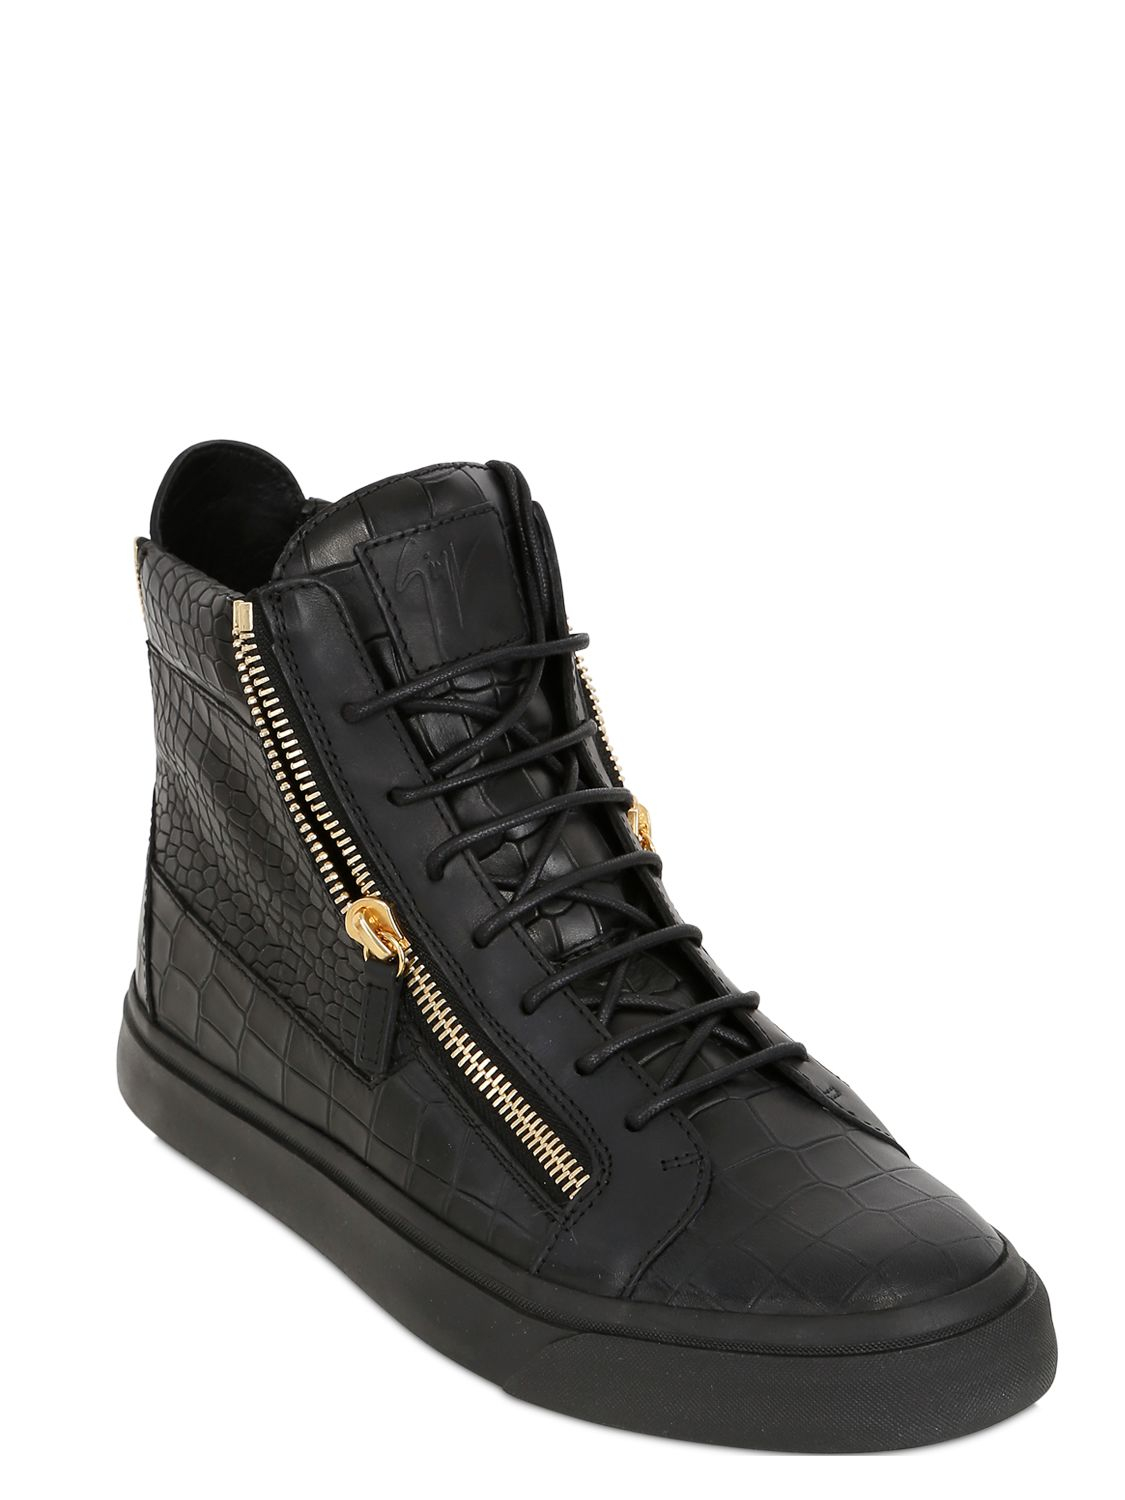 Lyst - Giuseppe Zanotti Croc Embossed Leather High Top Sneakers in ...